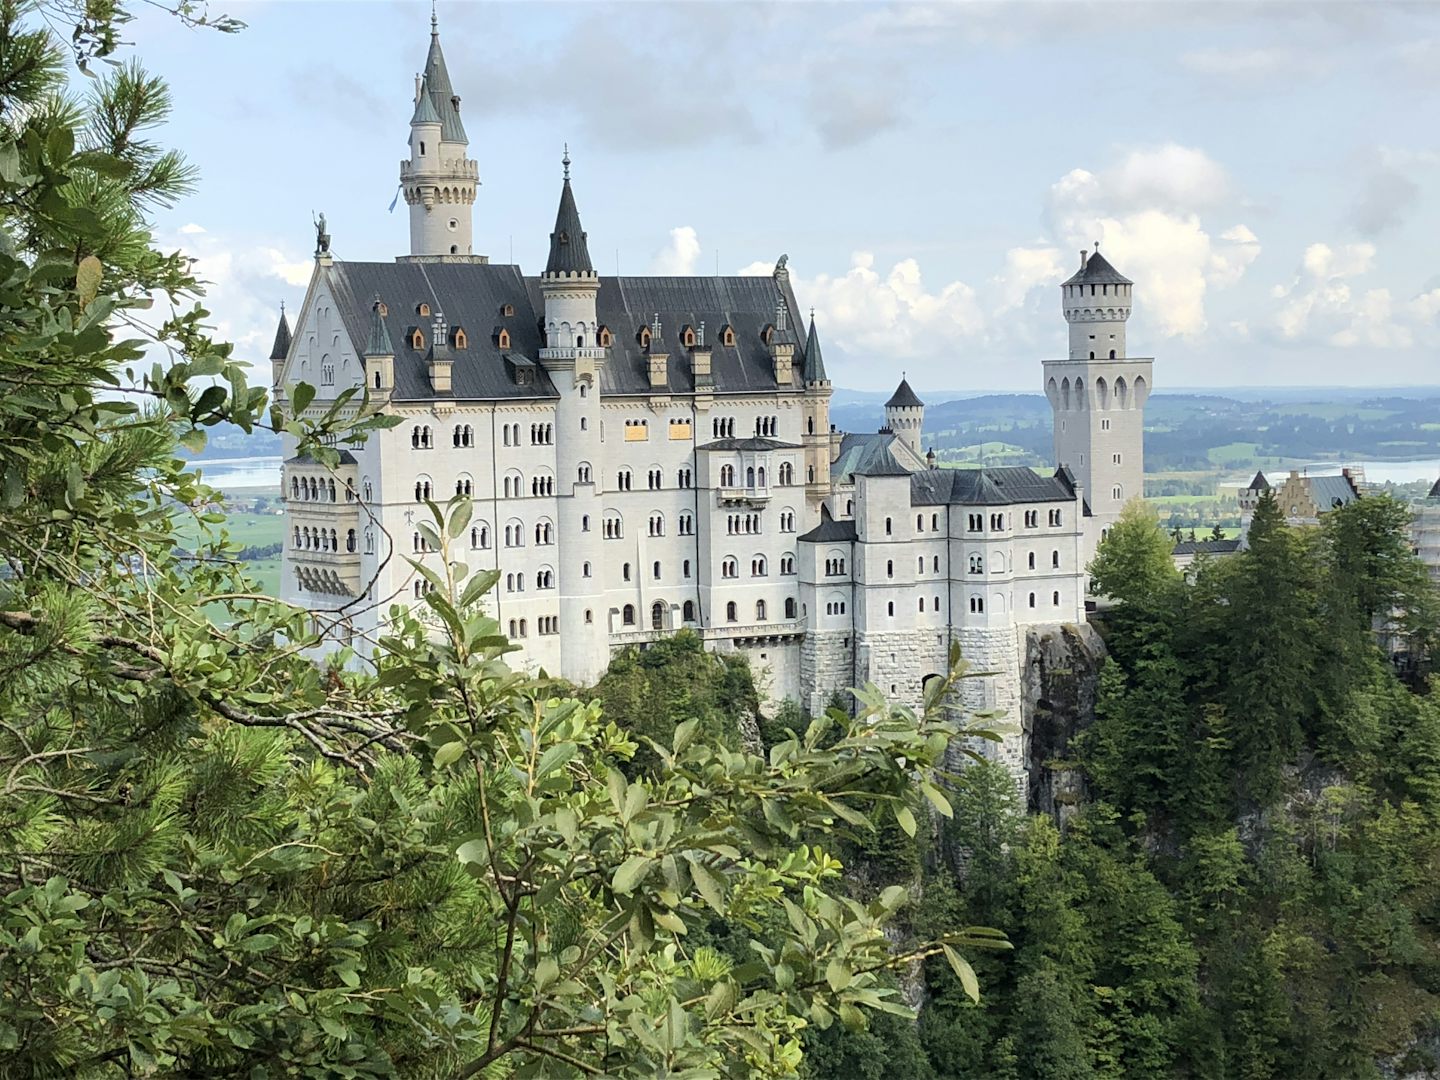 A view from the bridge of the Neuschwanstein Castle built by King Ludwig II